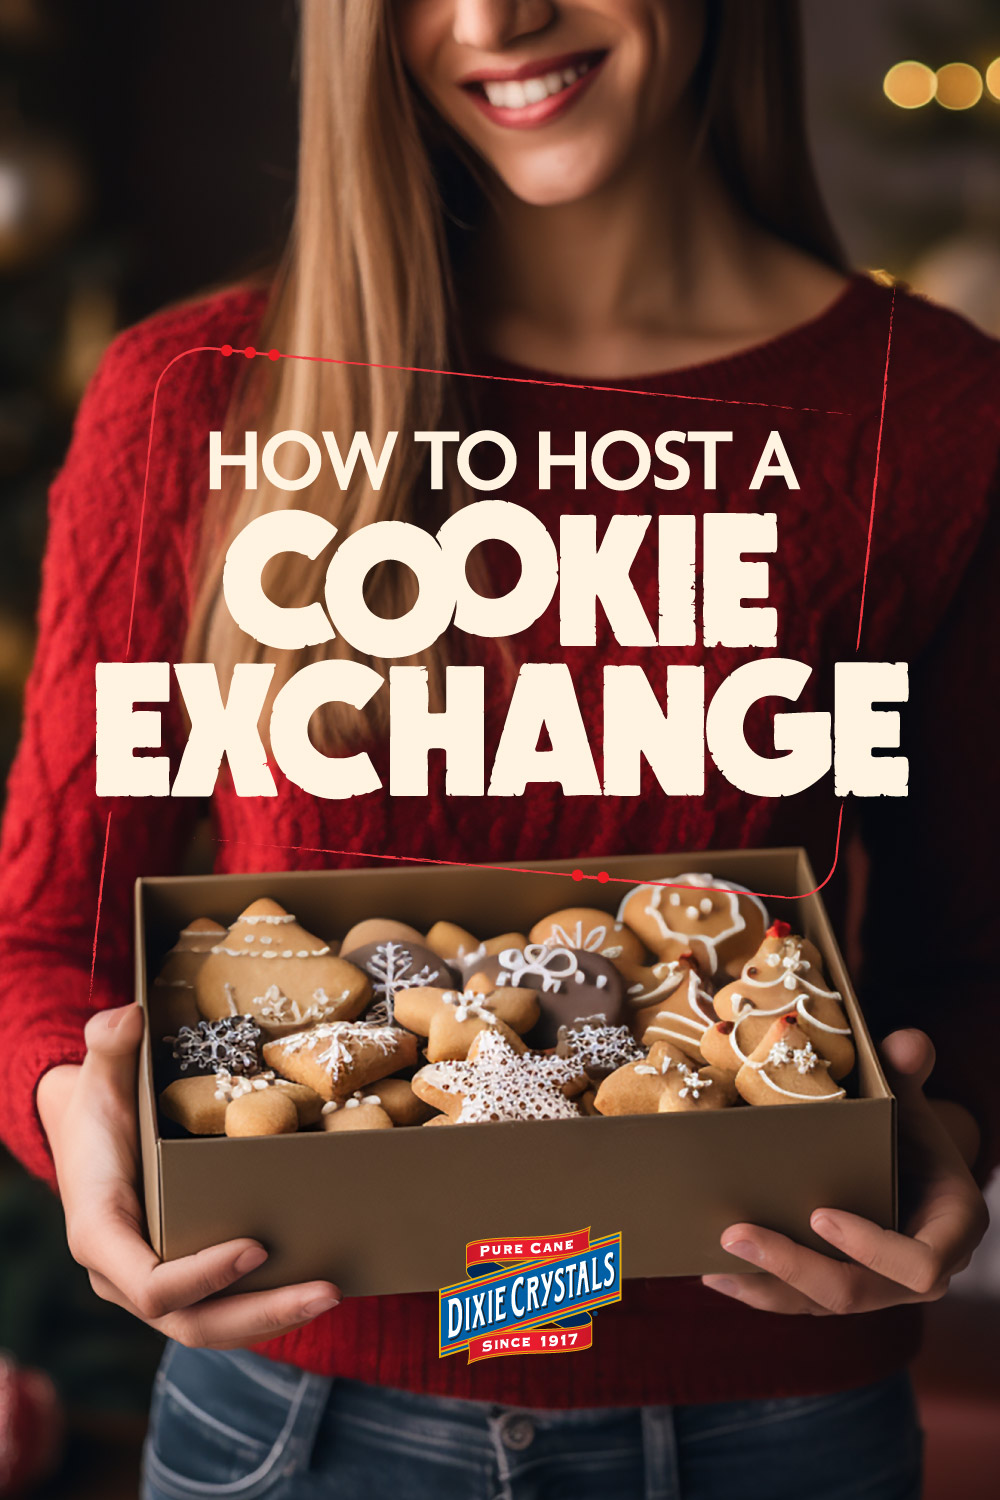 "how to host a cookie exchange party"